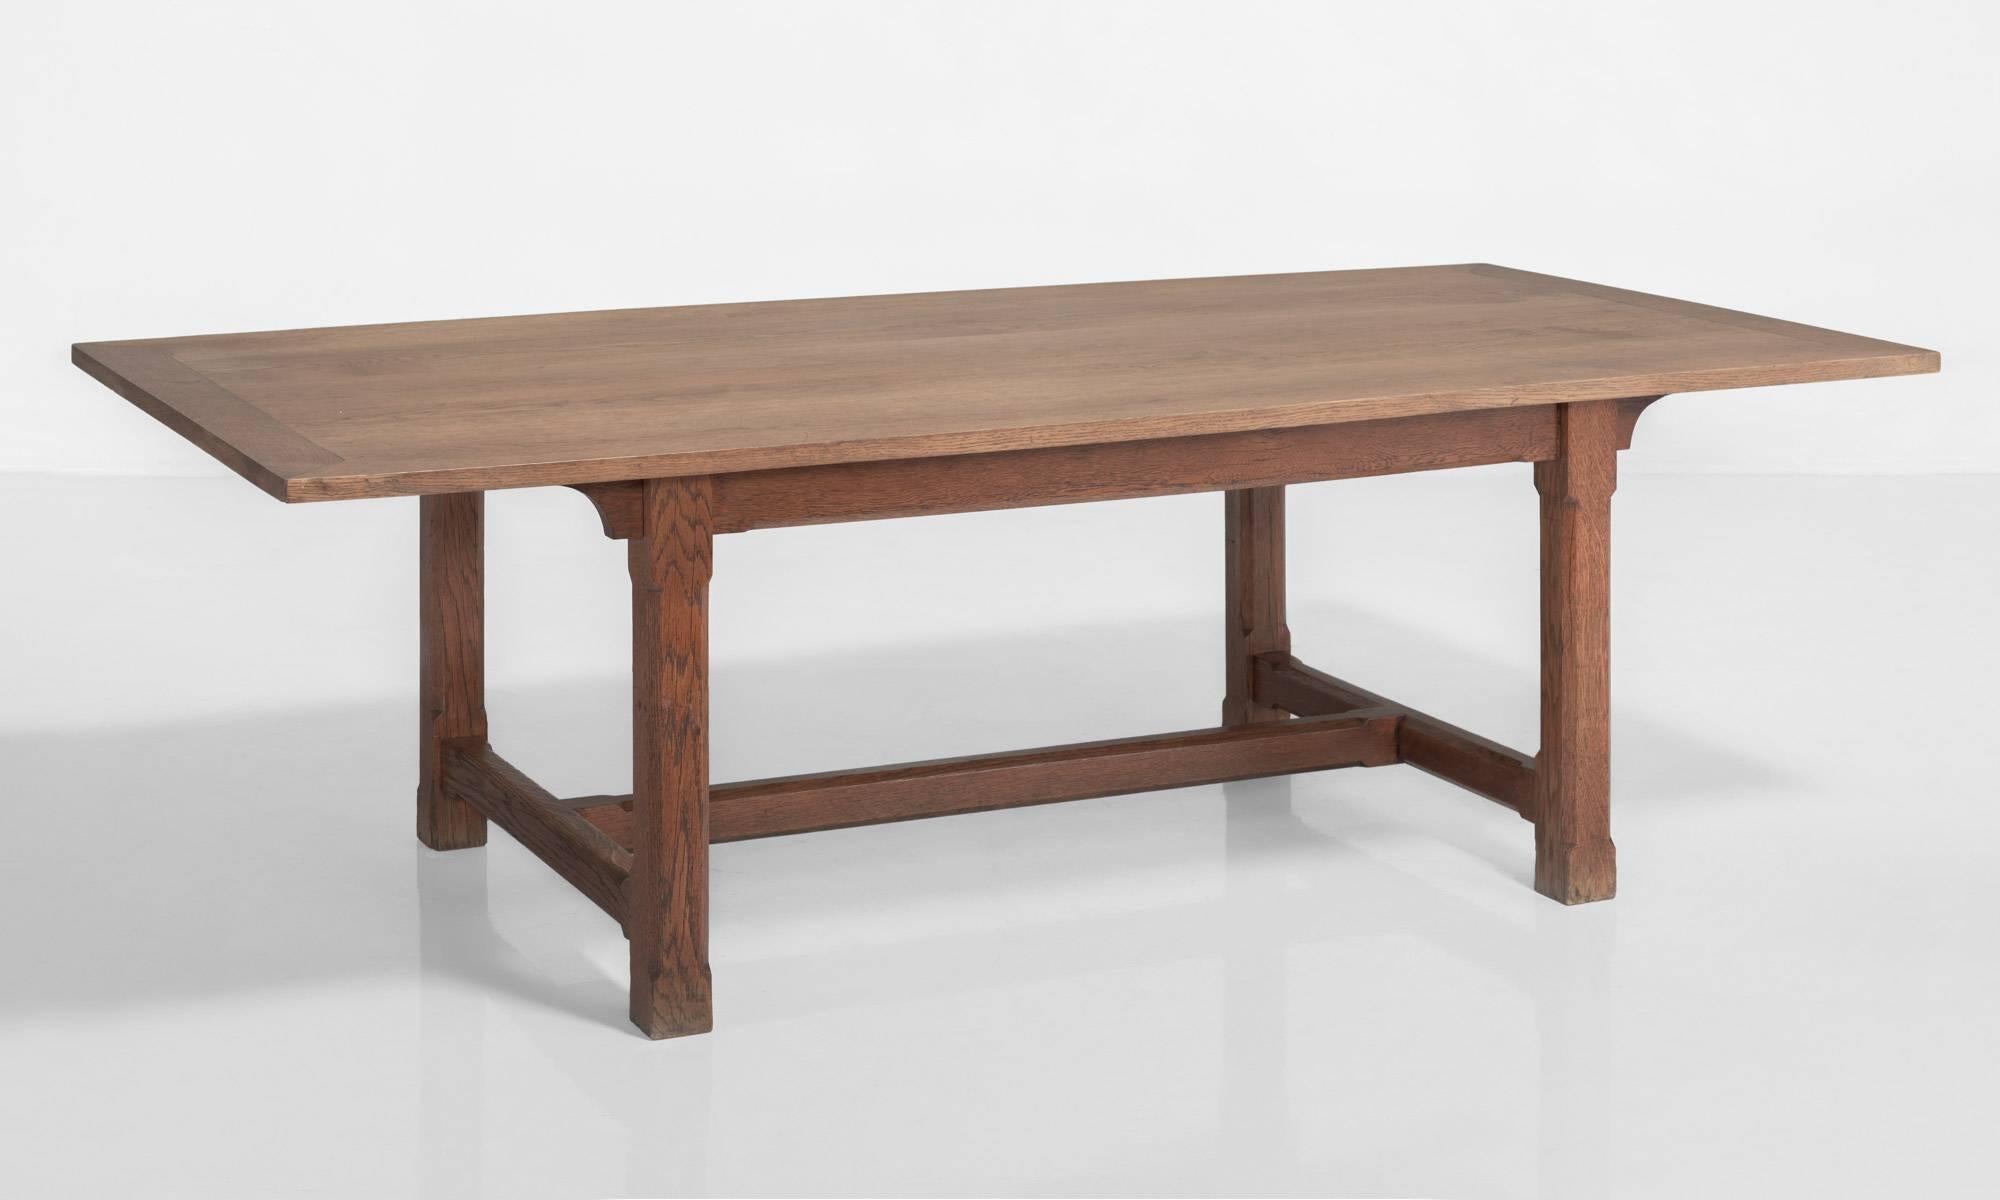 Gothic Oak Refectory Table, England, circa 1900

Beautifully crafted table made of solid oak.